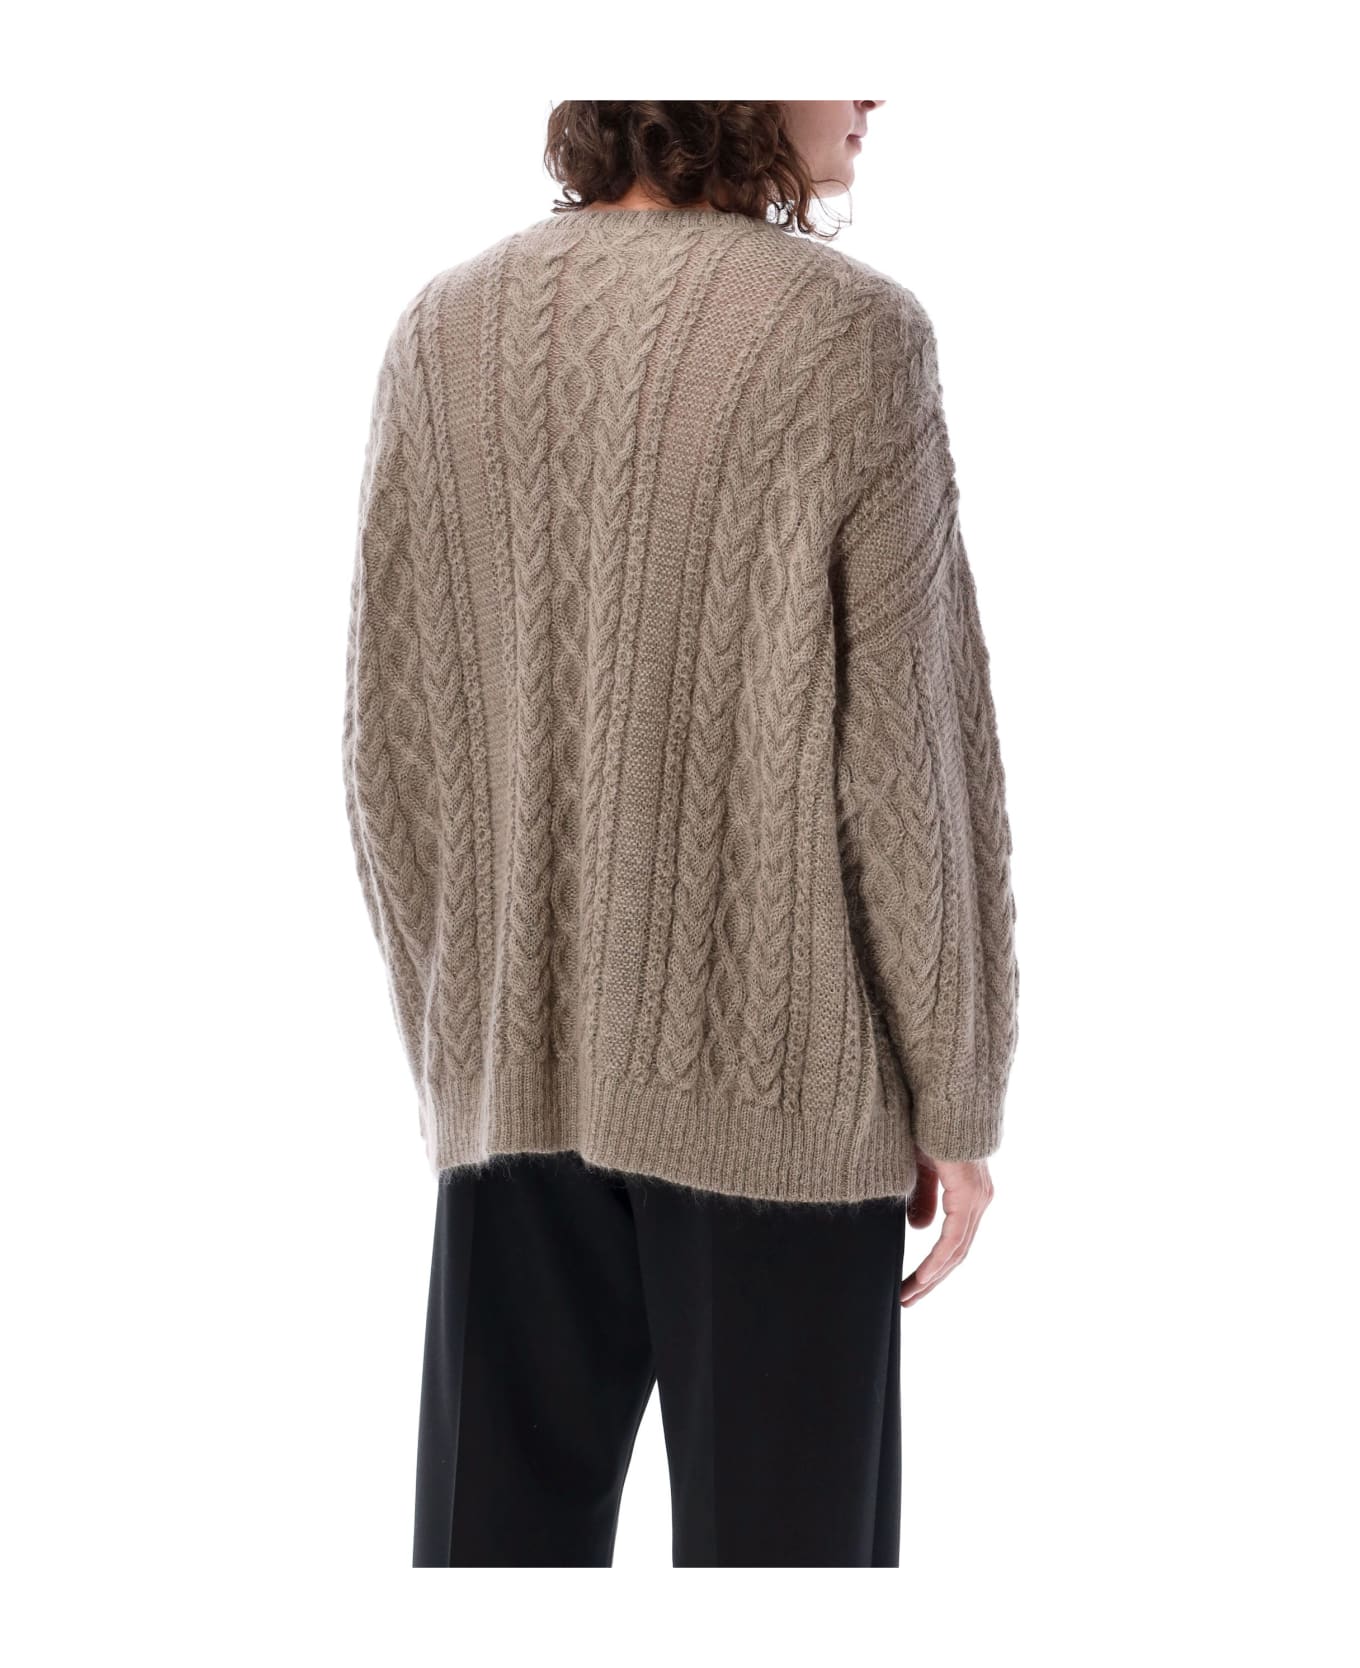 Undercover Jun Takahashi Cable Knit Sweater - GREY BEIGE